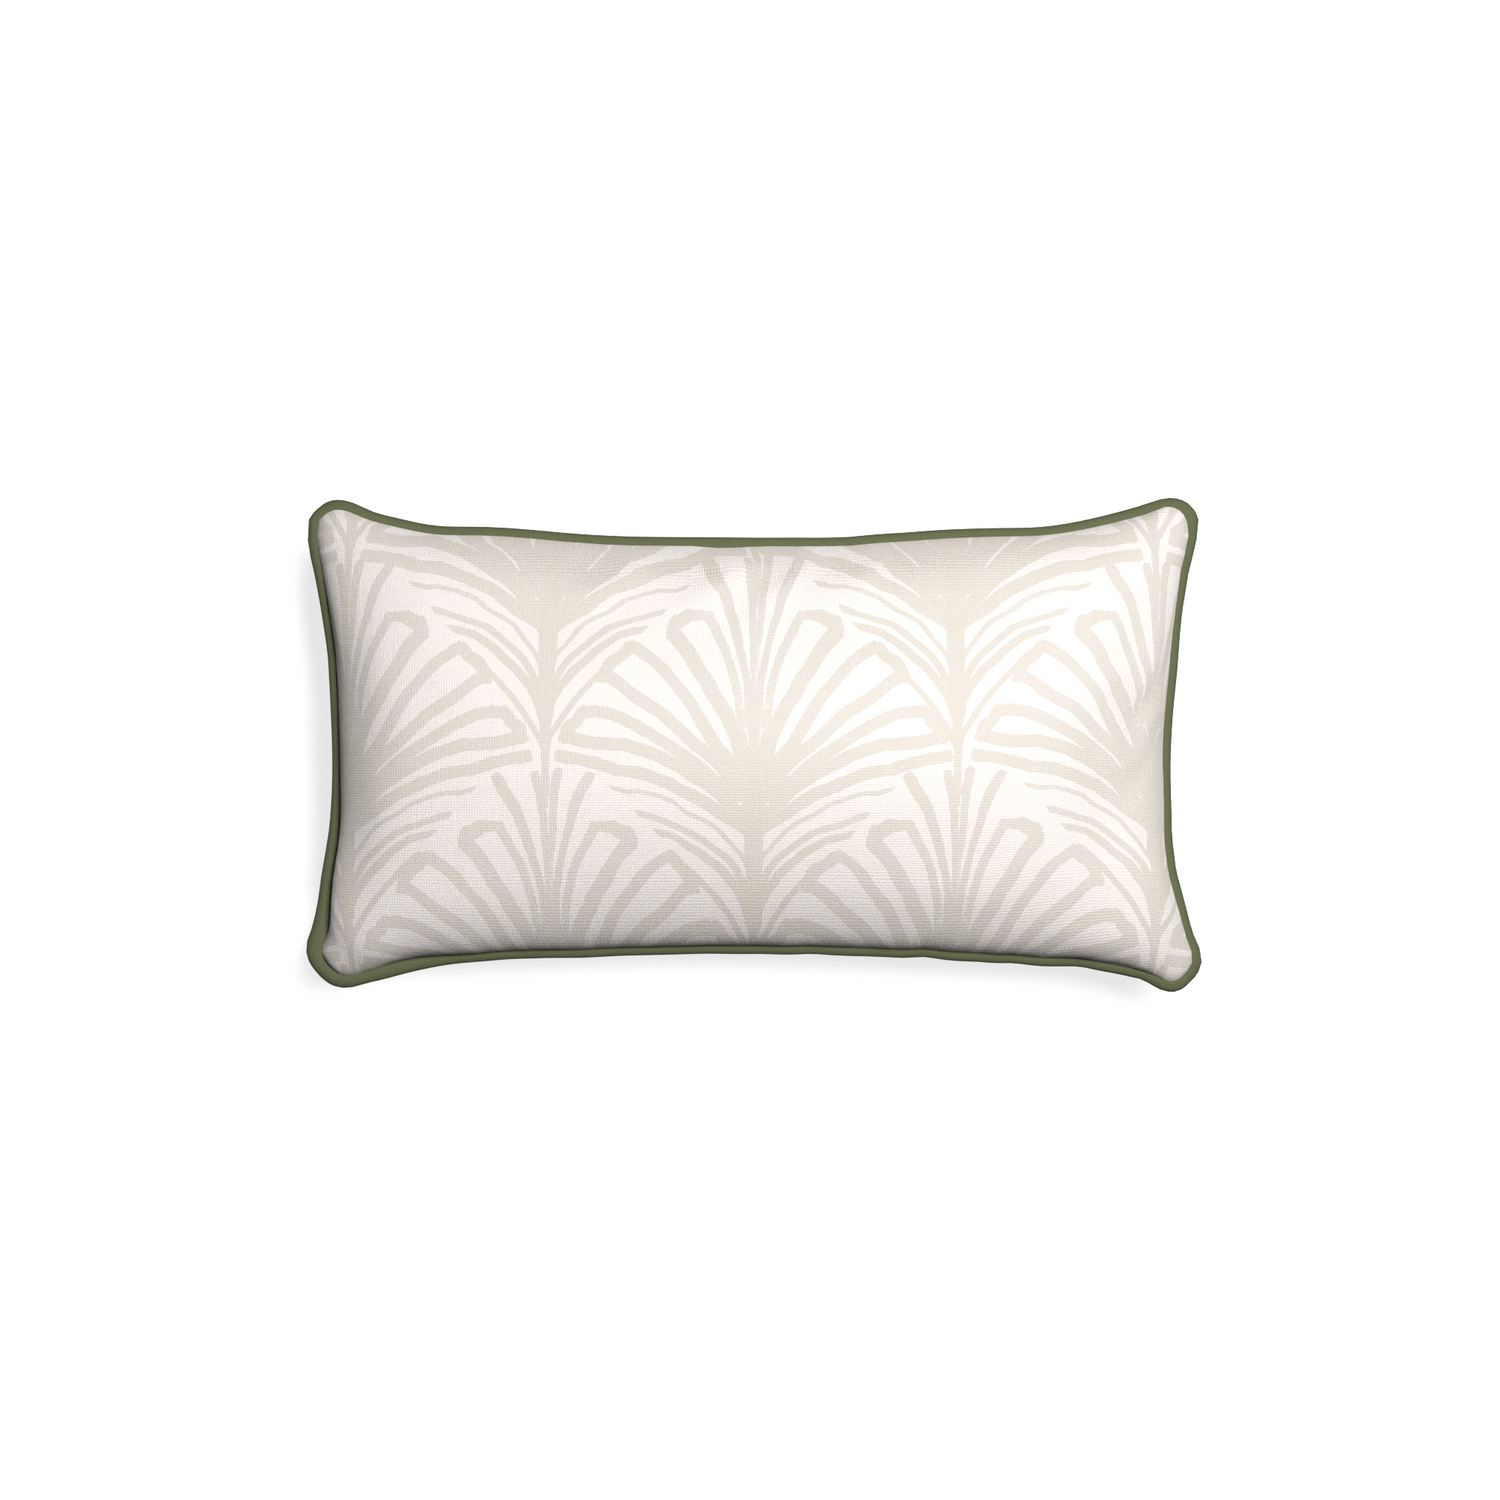 Petite-lumbar suzy sand custom beige palmpillow with f piping on white background